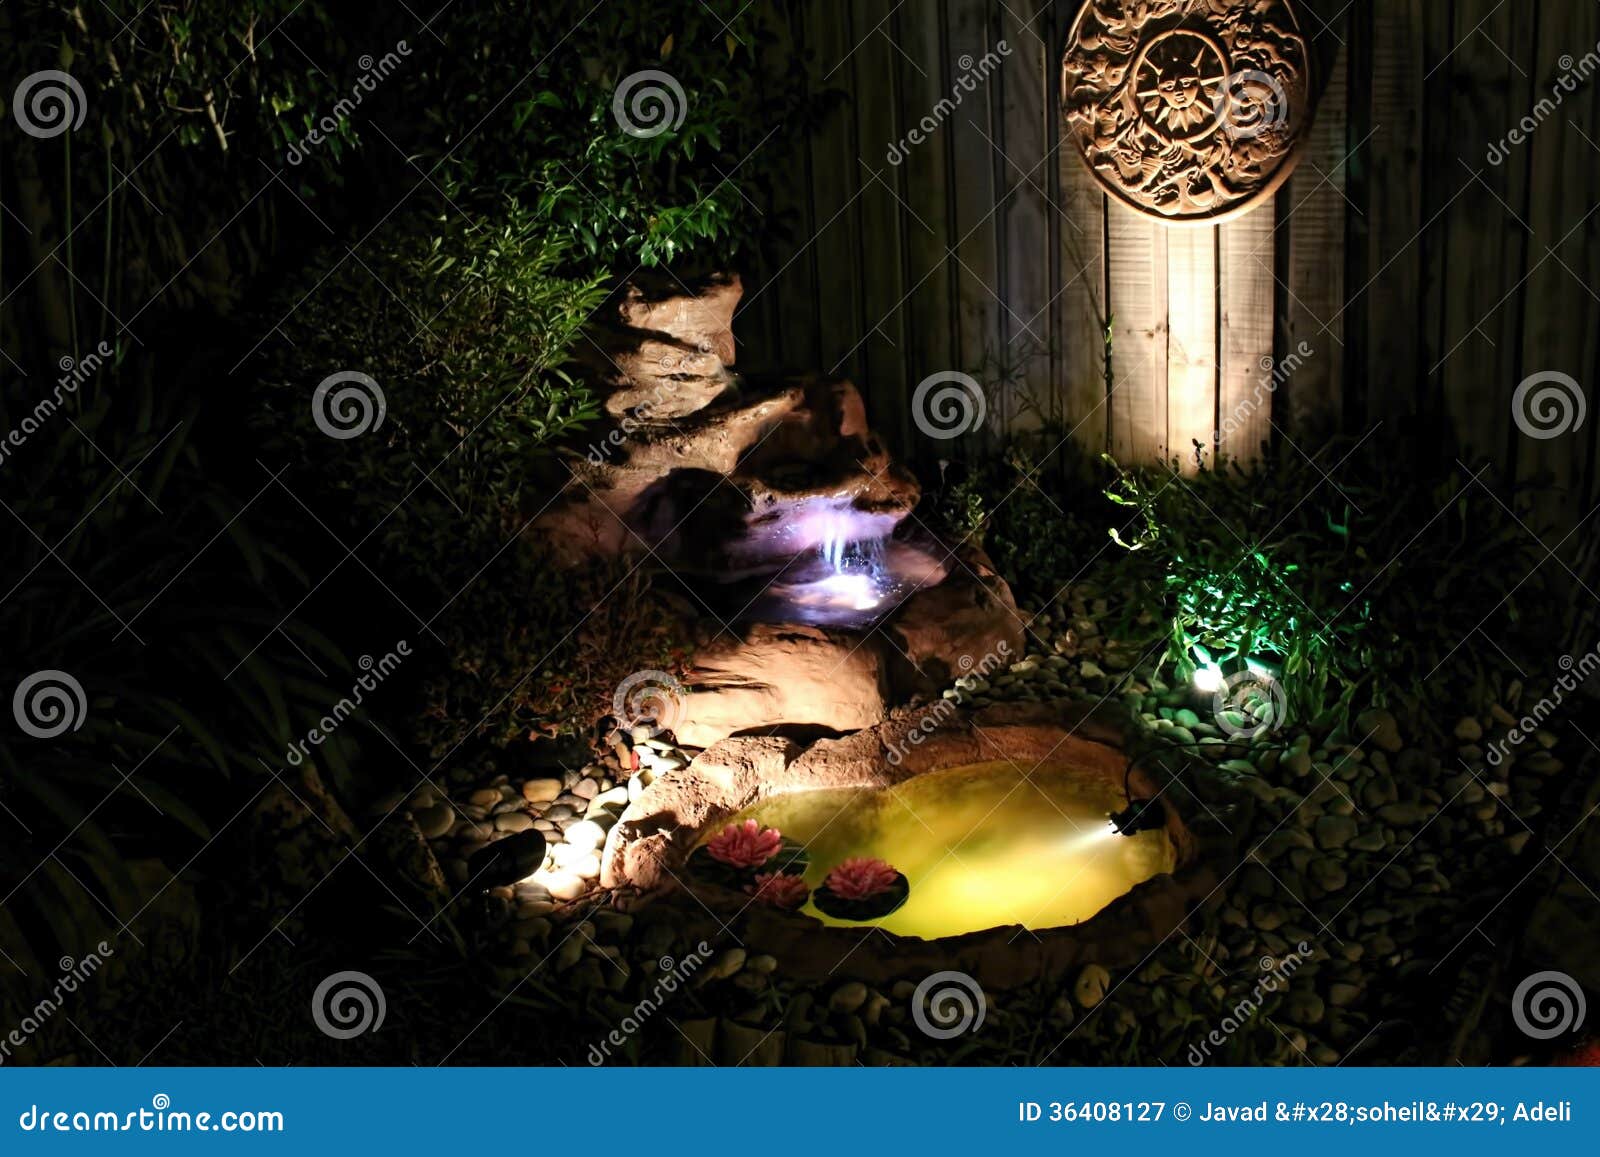 outdoor garden with water feature fishpond at nigh